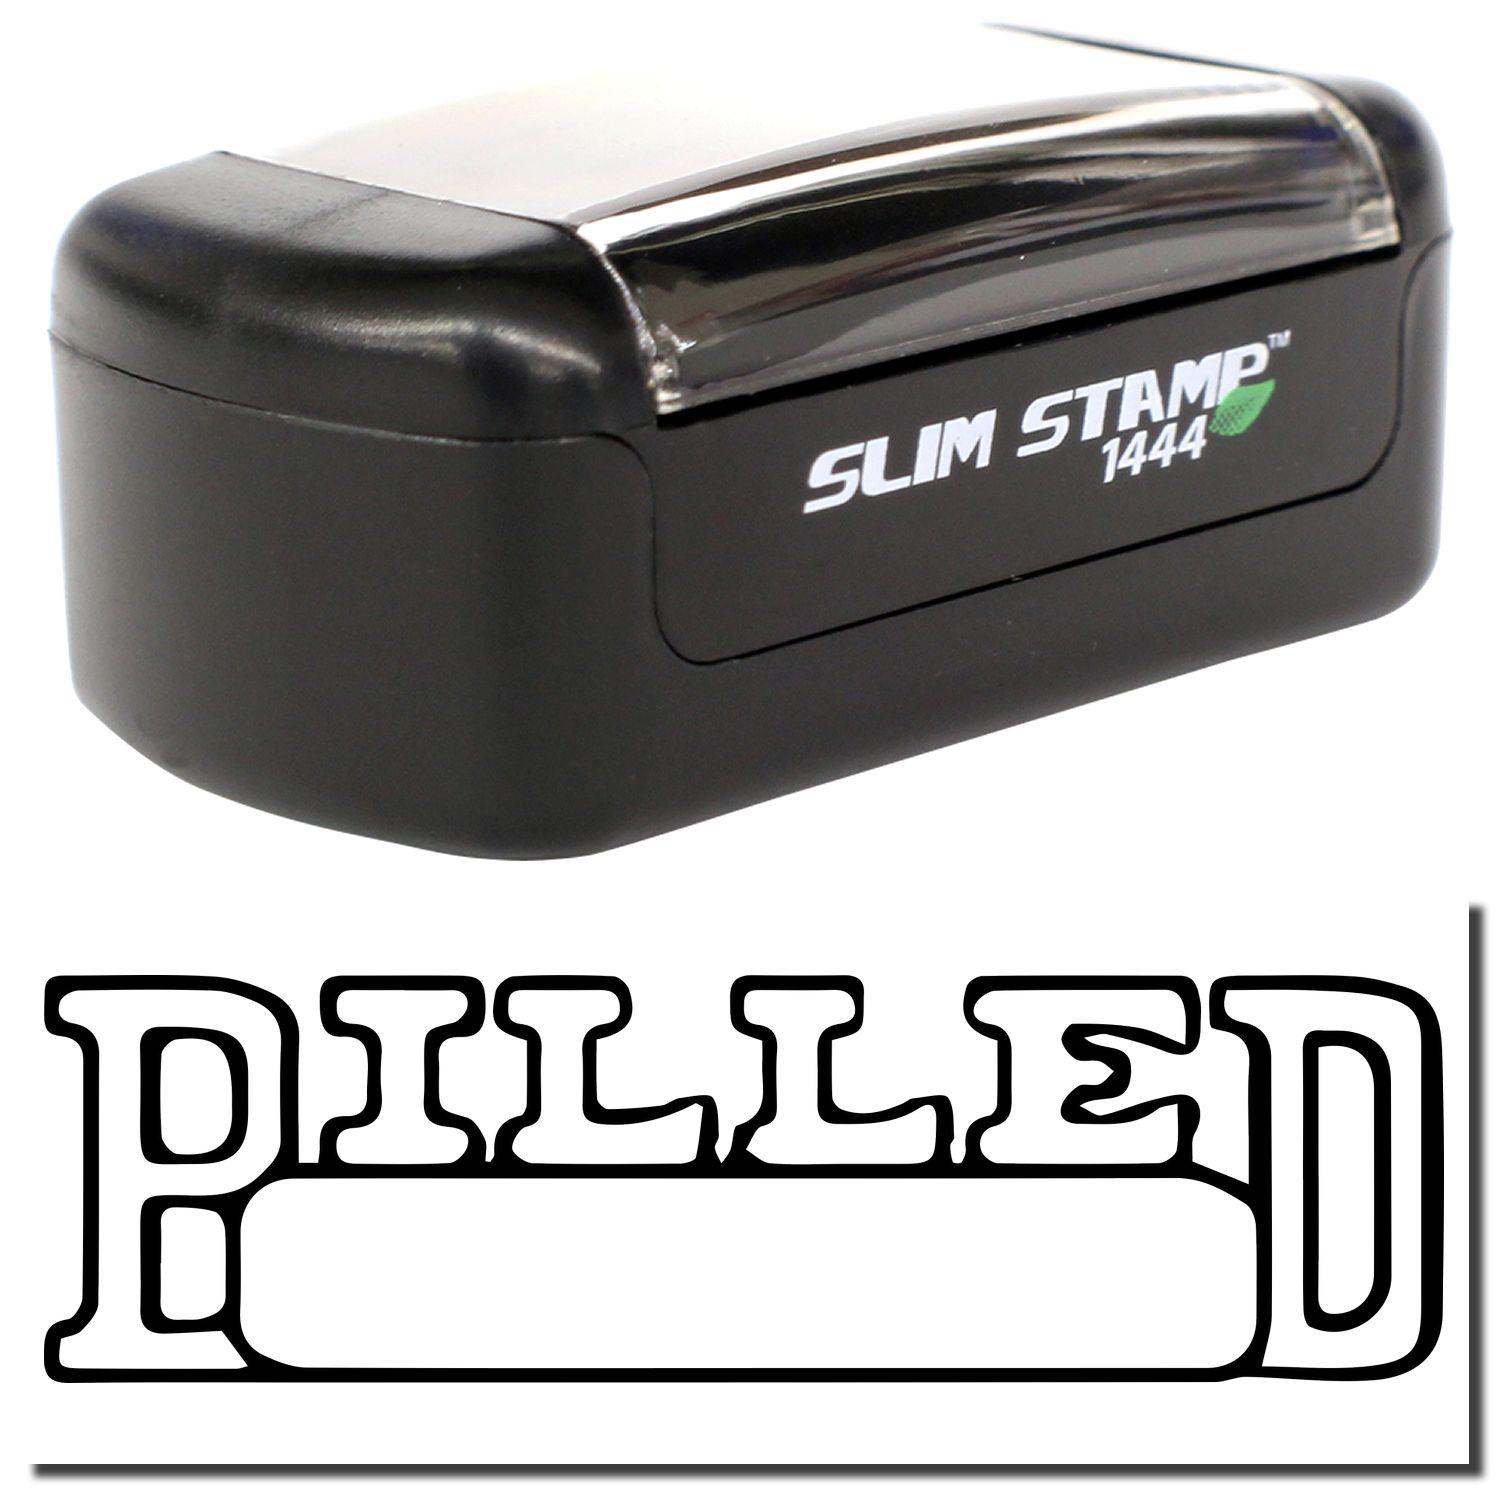 A stock office pre-inked stamp with a stamped image showing how the text "BILLED" in an outline font with a date box is displayed after stamping.